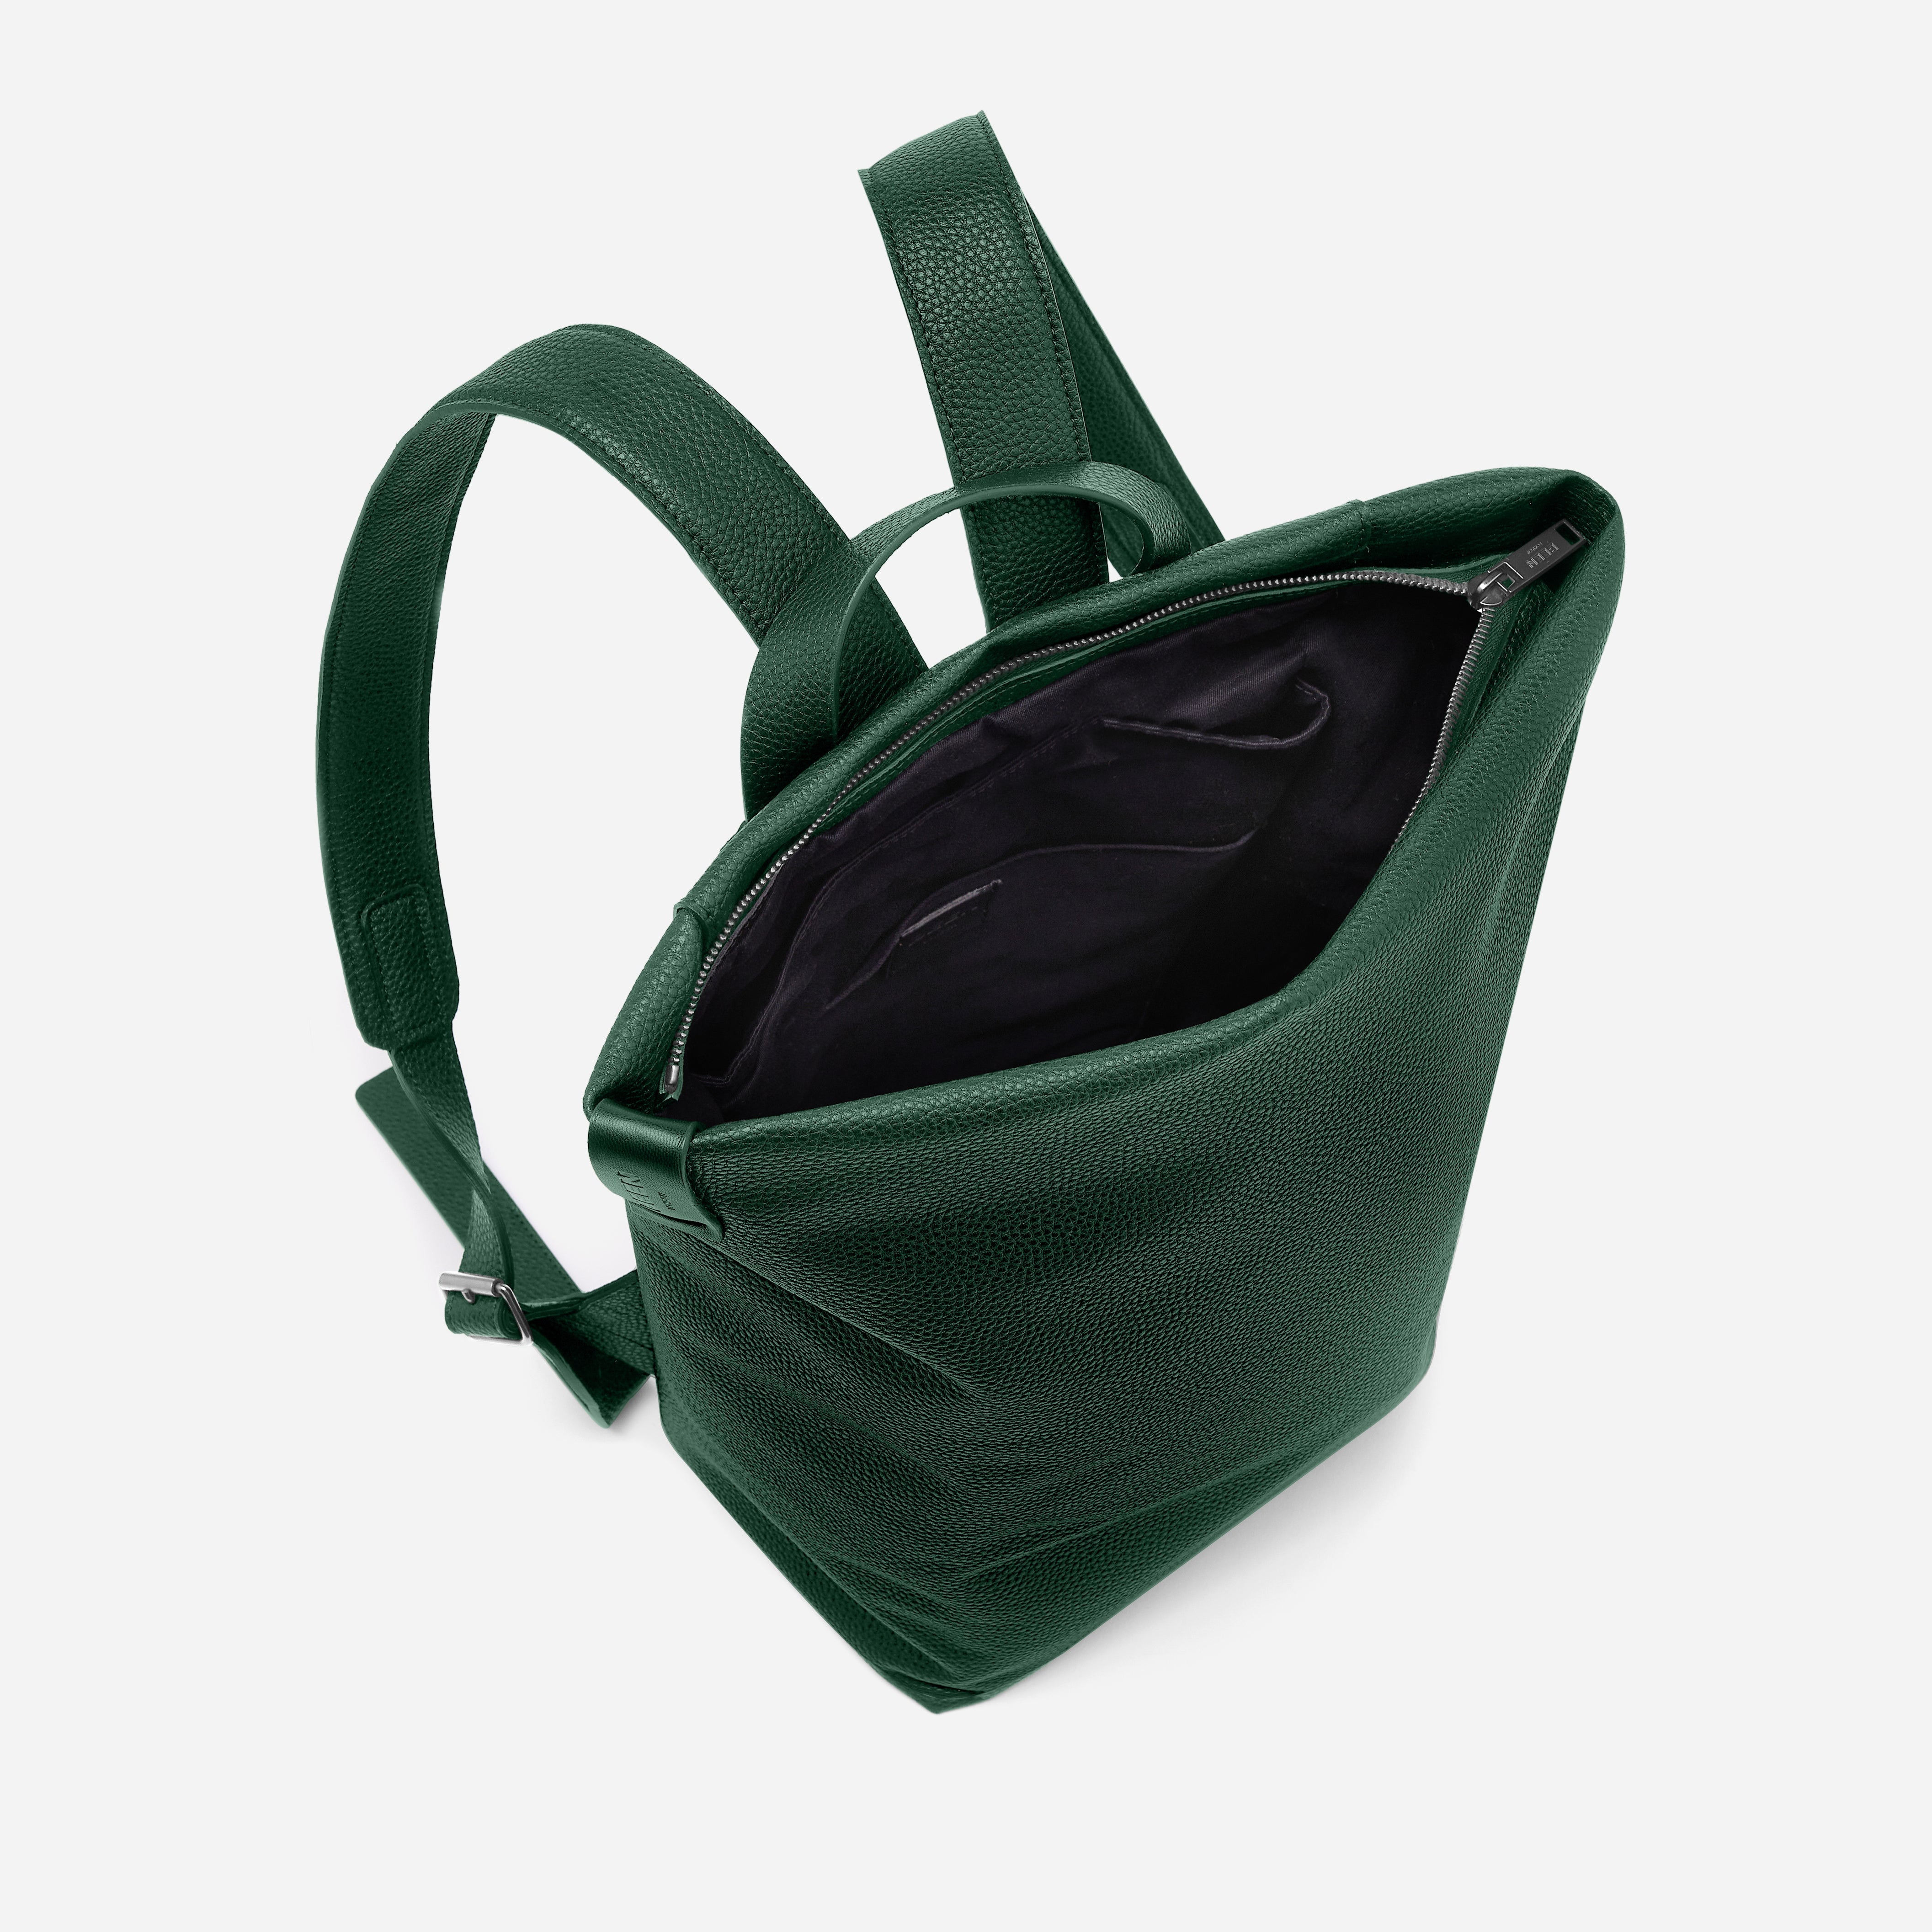 Lauriston Pine Green Backpack